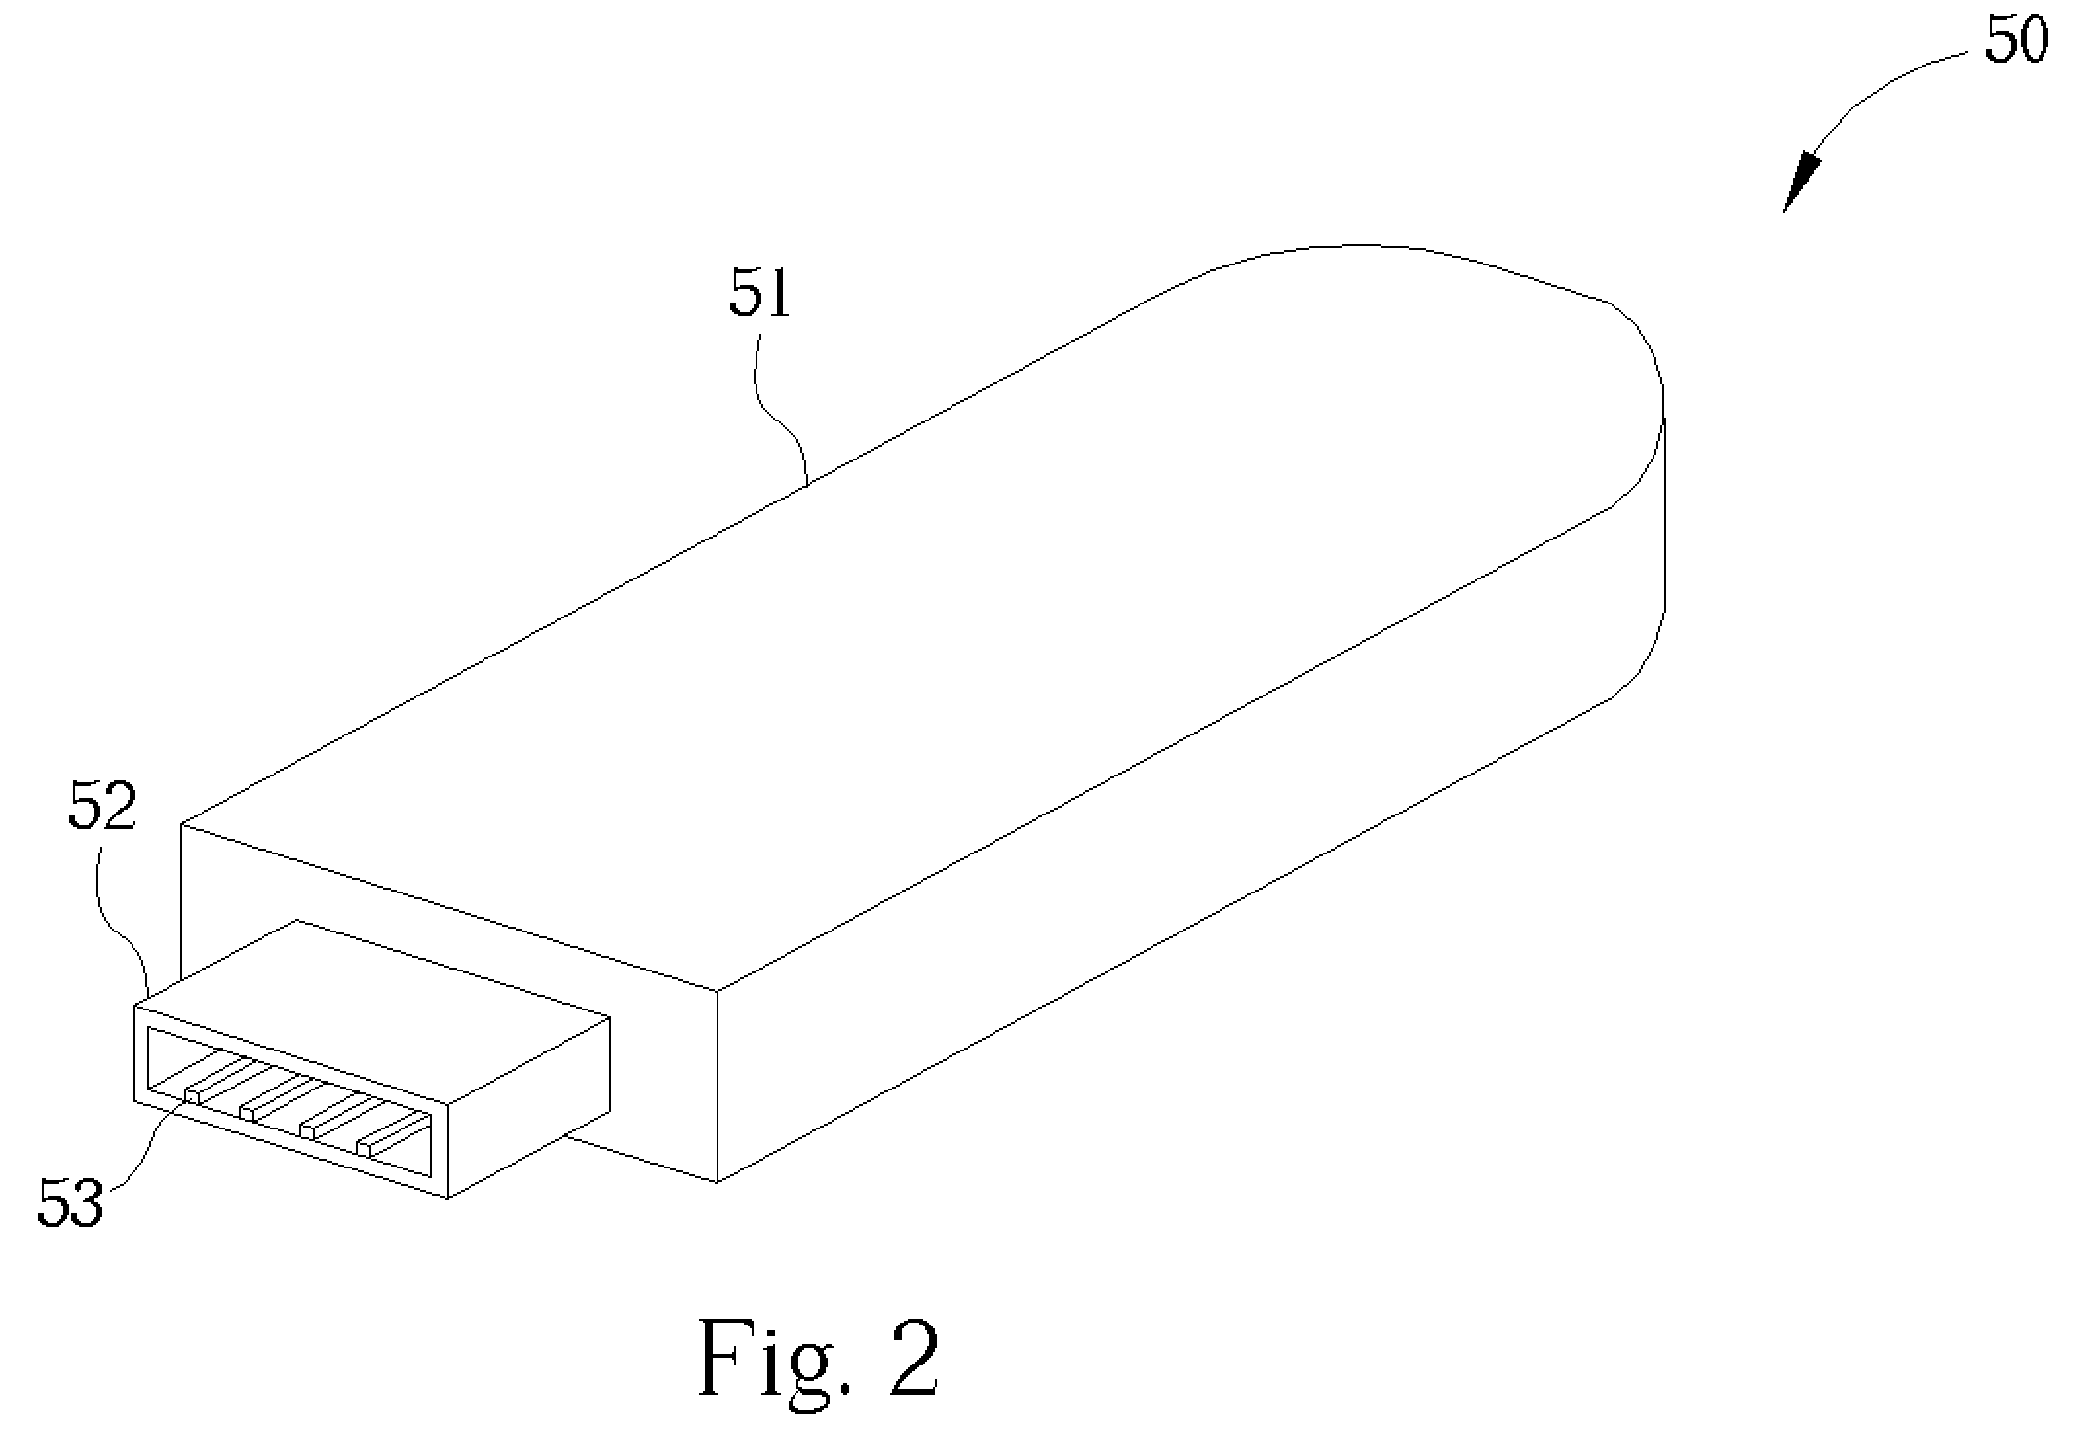 Peripheral device having a personal disk used for storing device drivers